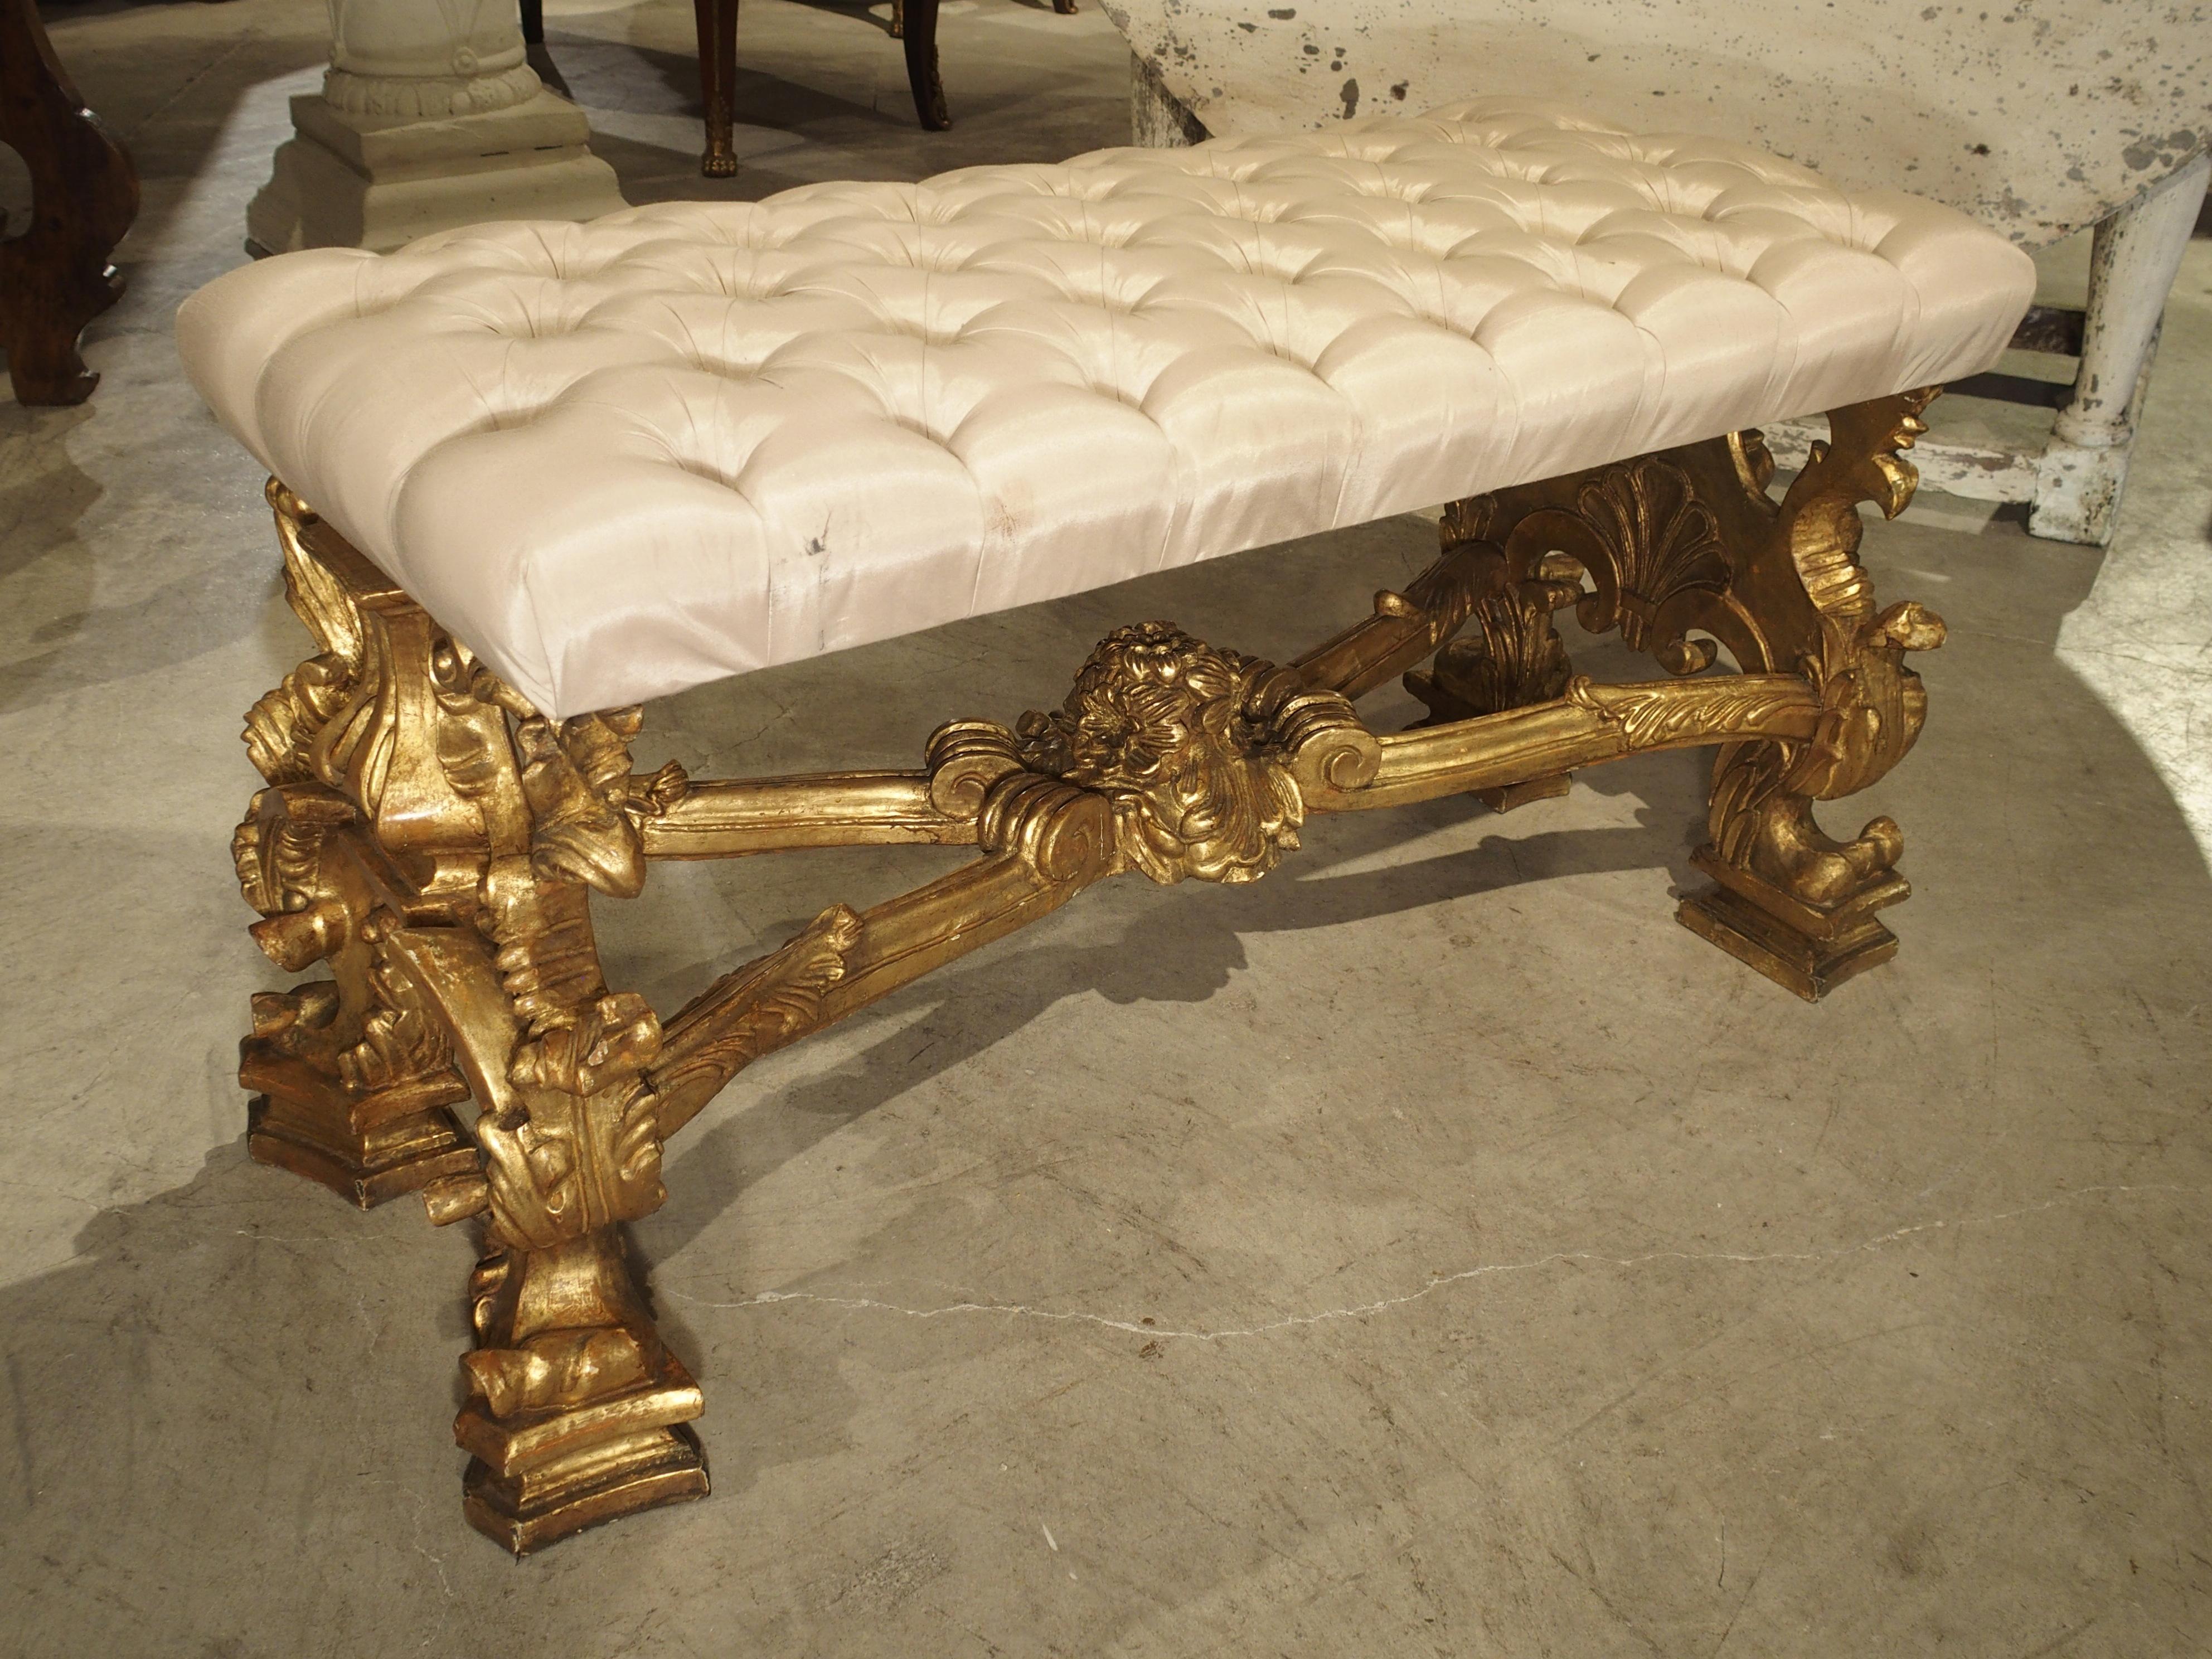 This luxurious giltwood Italian bench is in the Rococo style with an attached tufted seat cushion in a cream colored silk. The gilded legs have motifs of scrolling and gadrooned acanthus leaves with stylized shells on the apron at either end. There